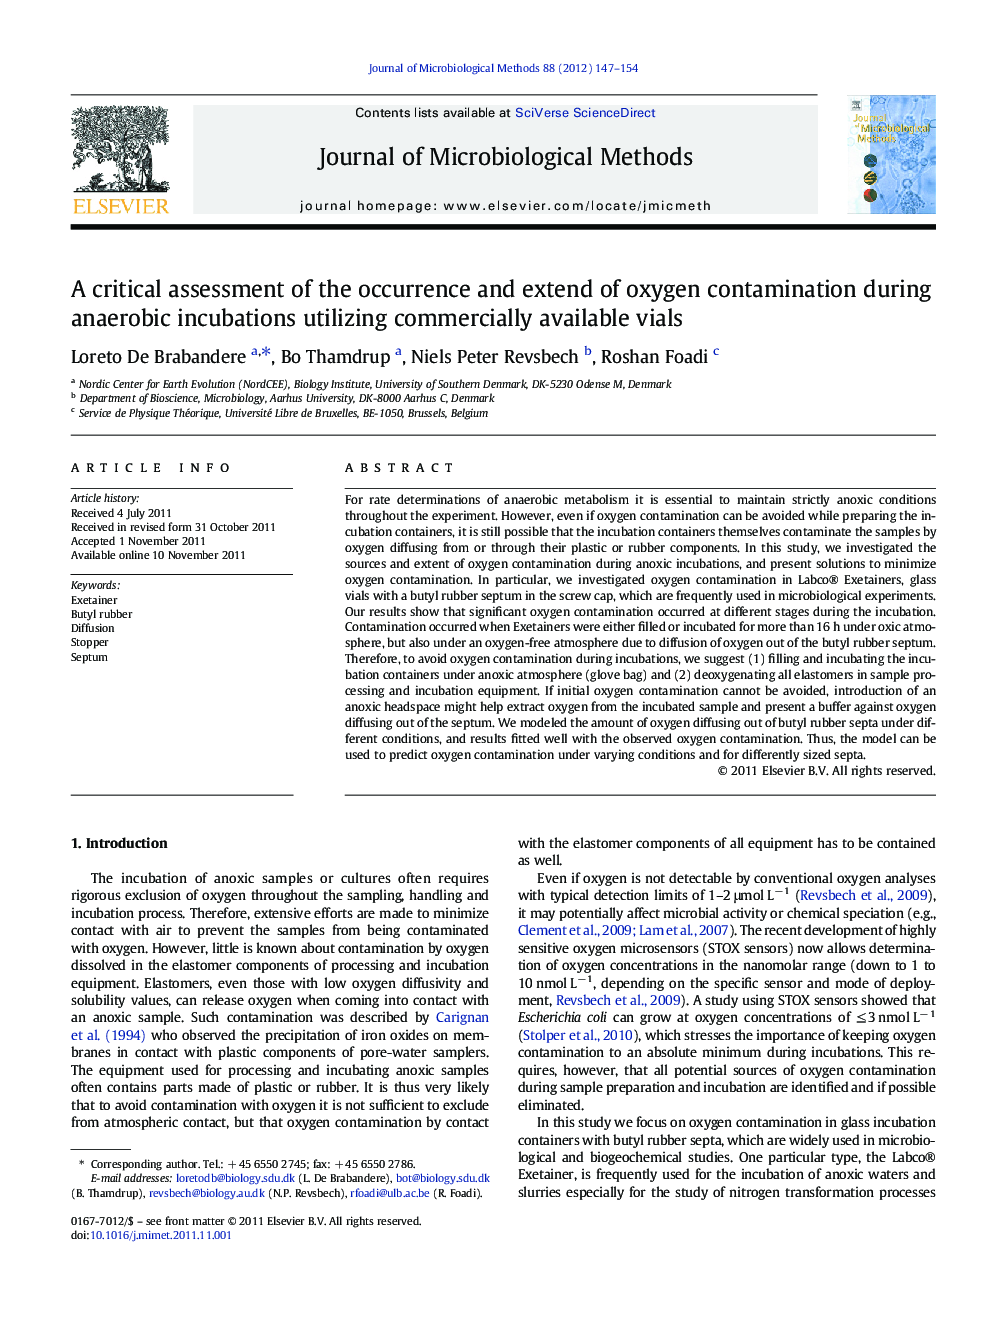 A critical assessment of the occurrence and extend of oxygen contamination during anaerobic incubations utilizing commercially available vials